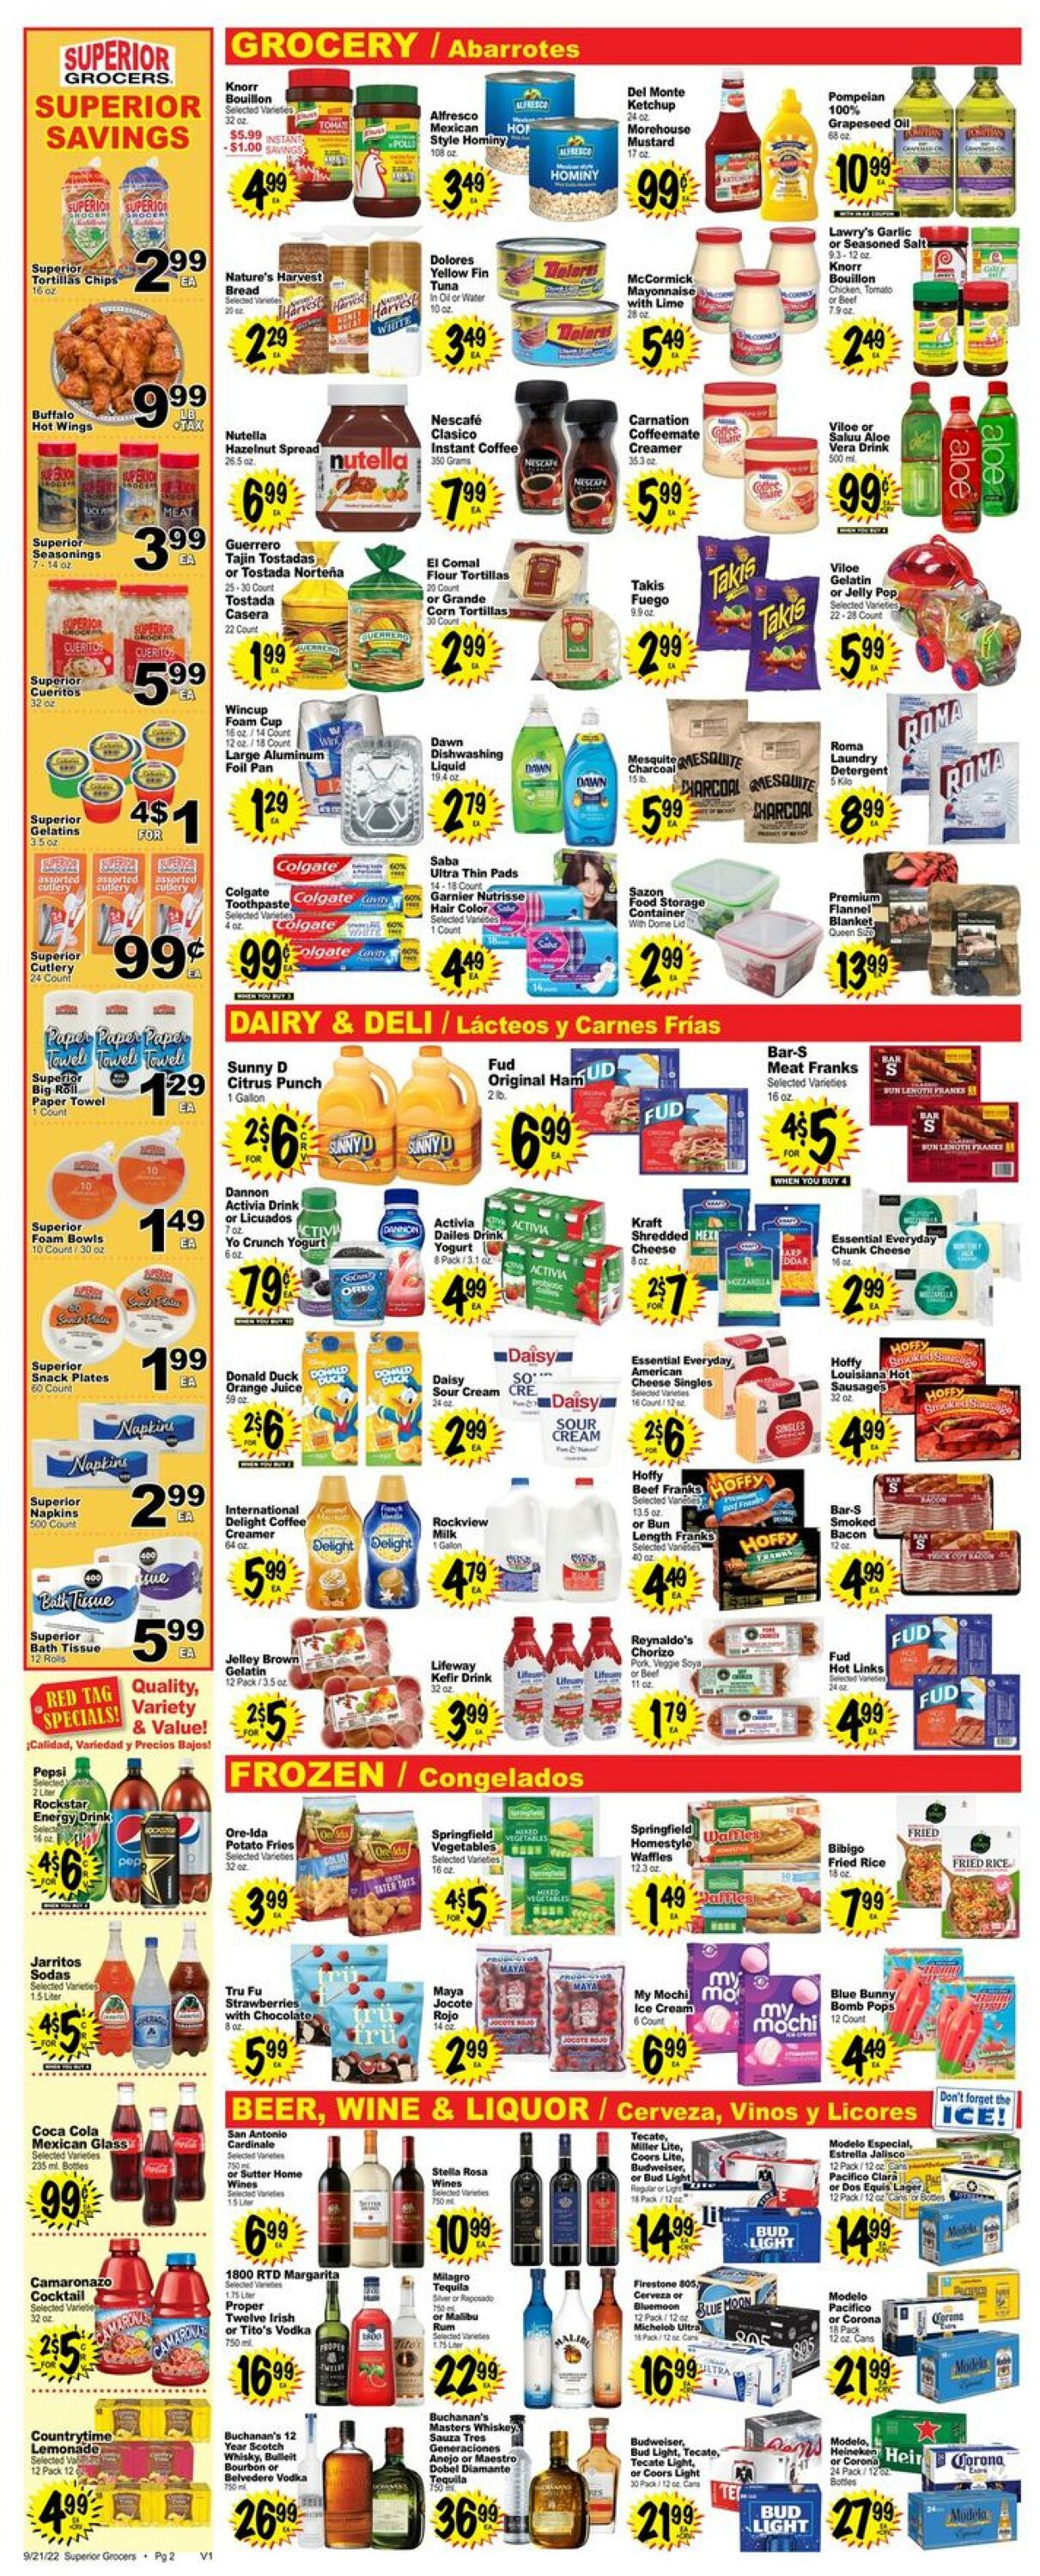 Weekly ad Superior Grocers 09/21/2022-09/27/2022